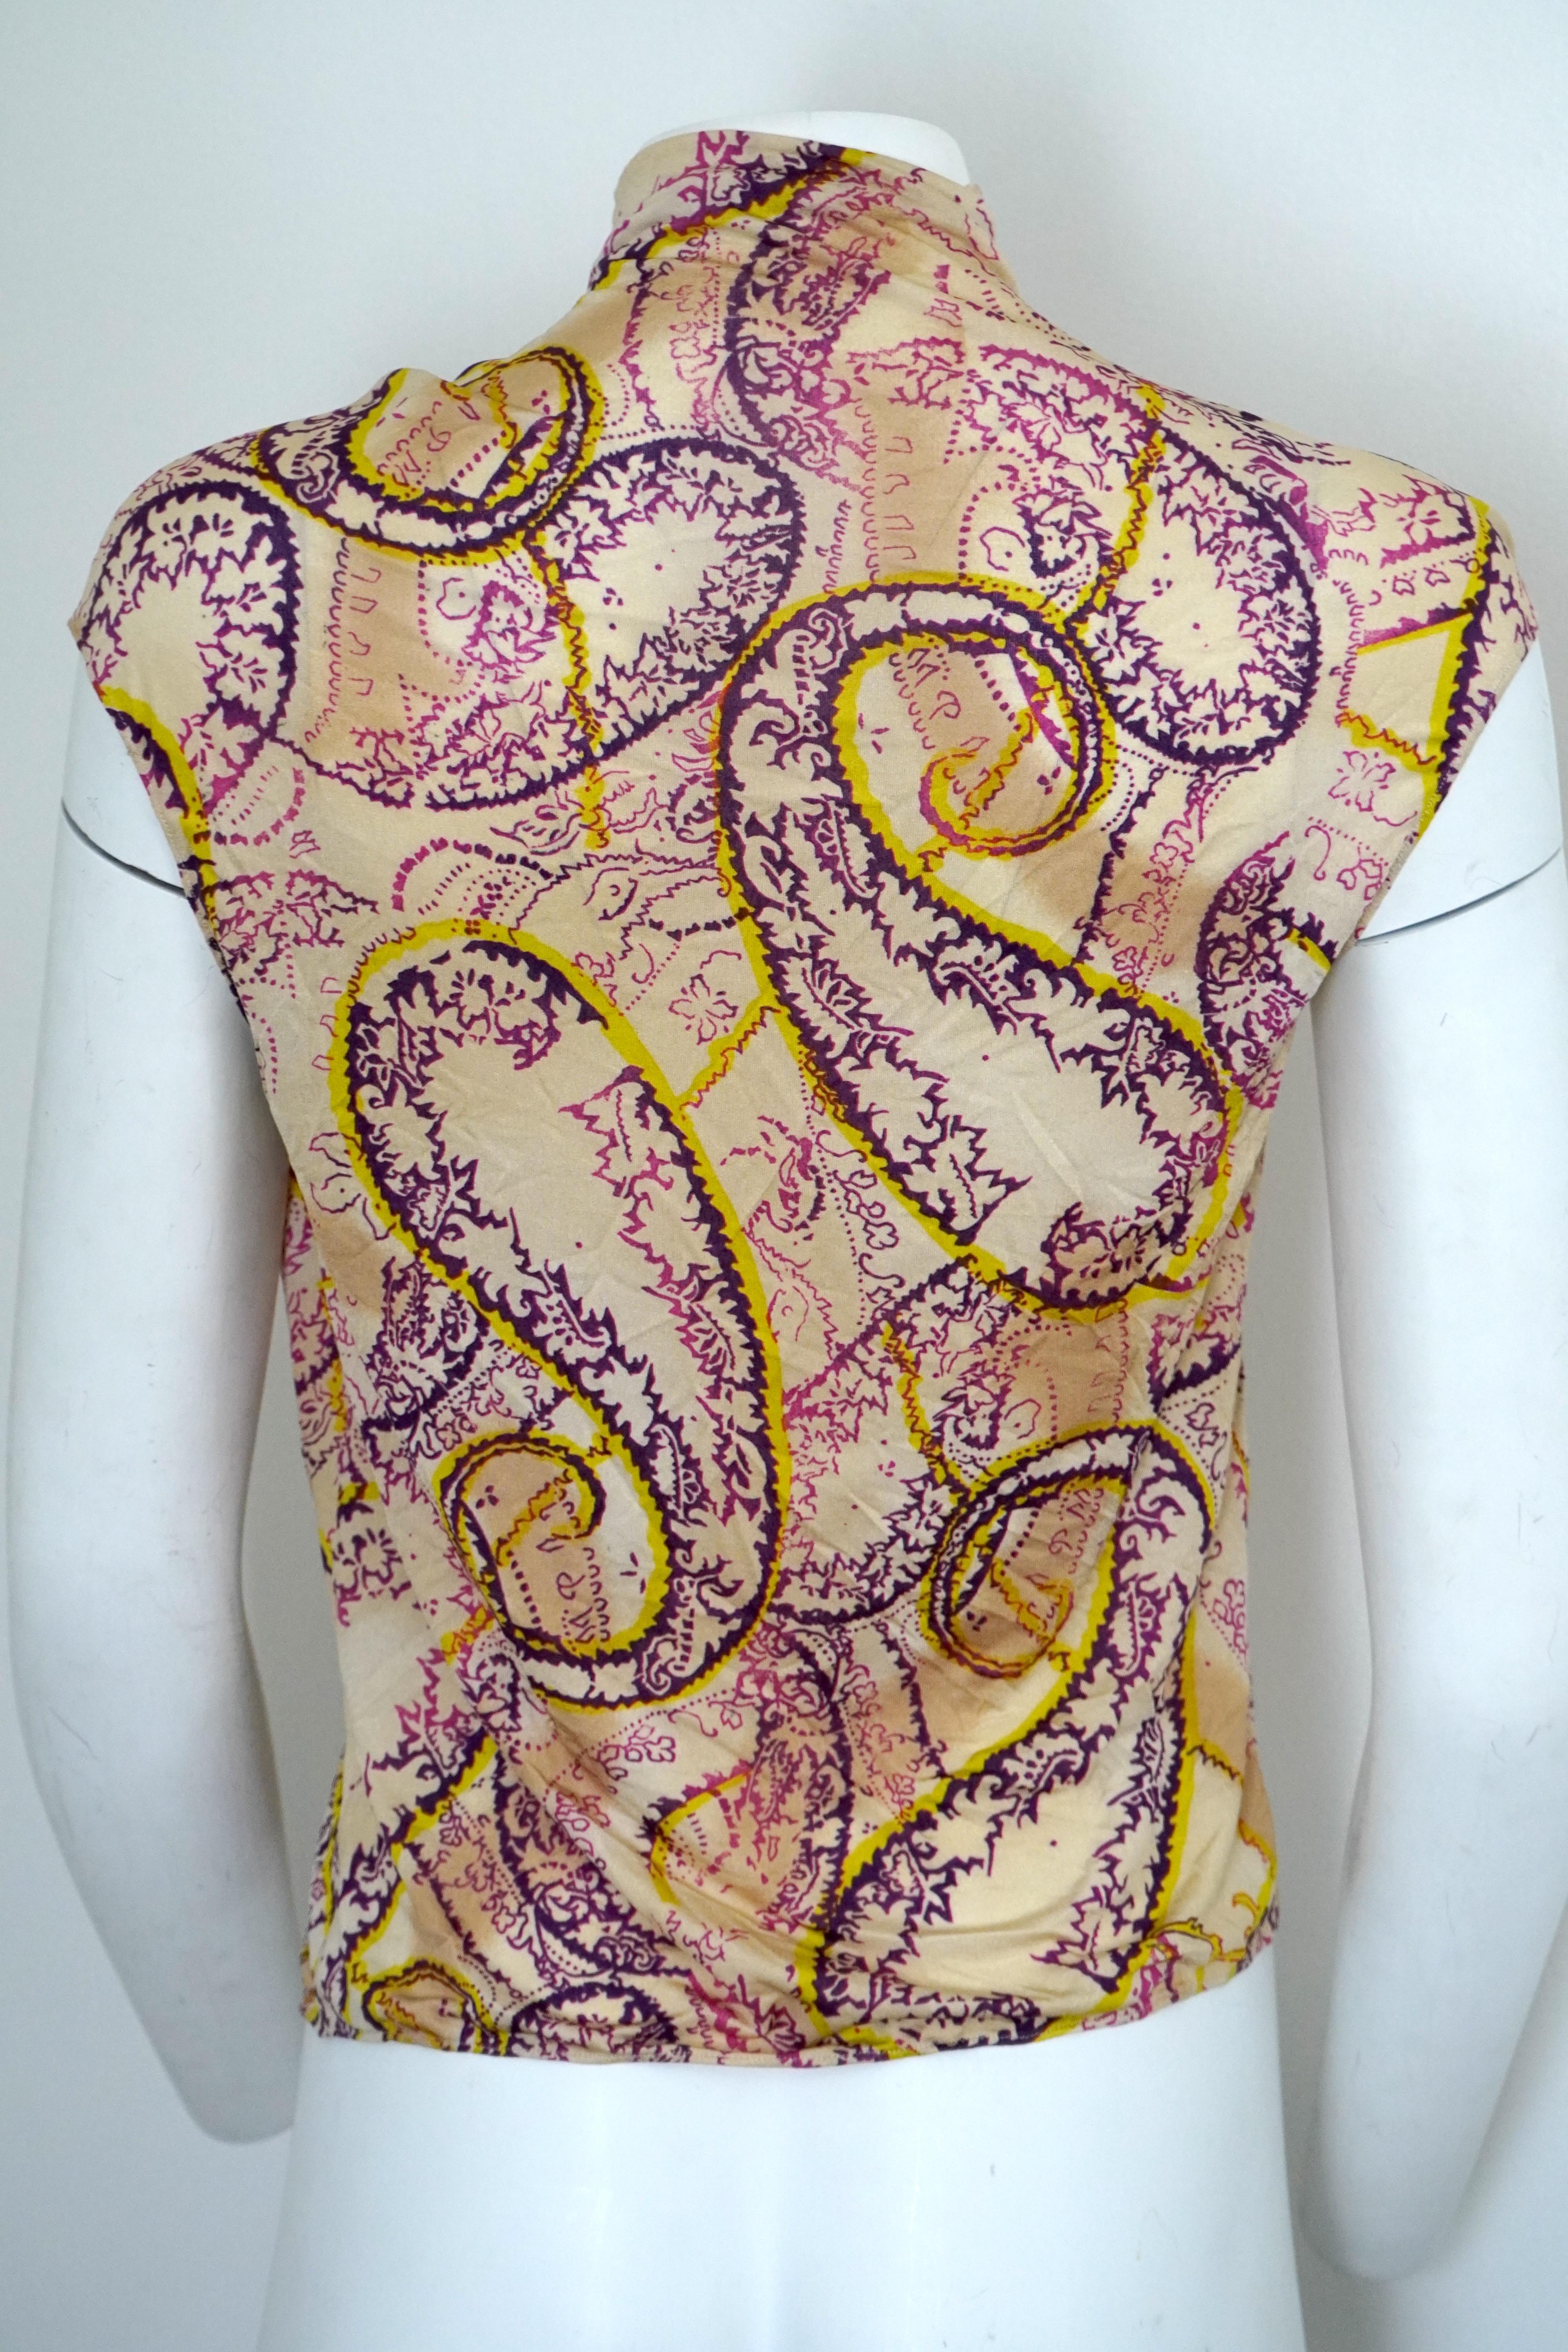 Emanuel Ungaro Sleeveless Mock Neck Paisley Top sz 38 In Excellent Condition For Sale In Beverly Hills, CA